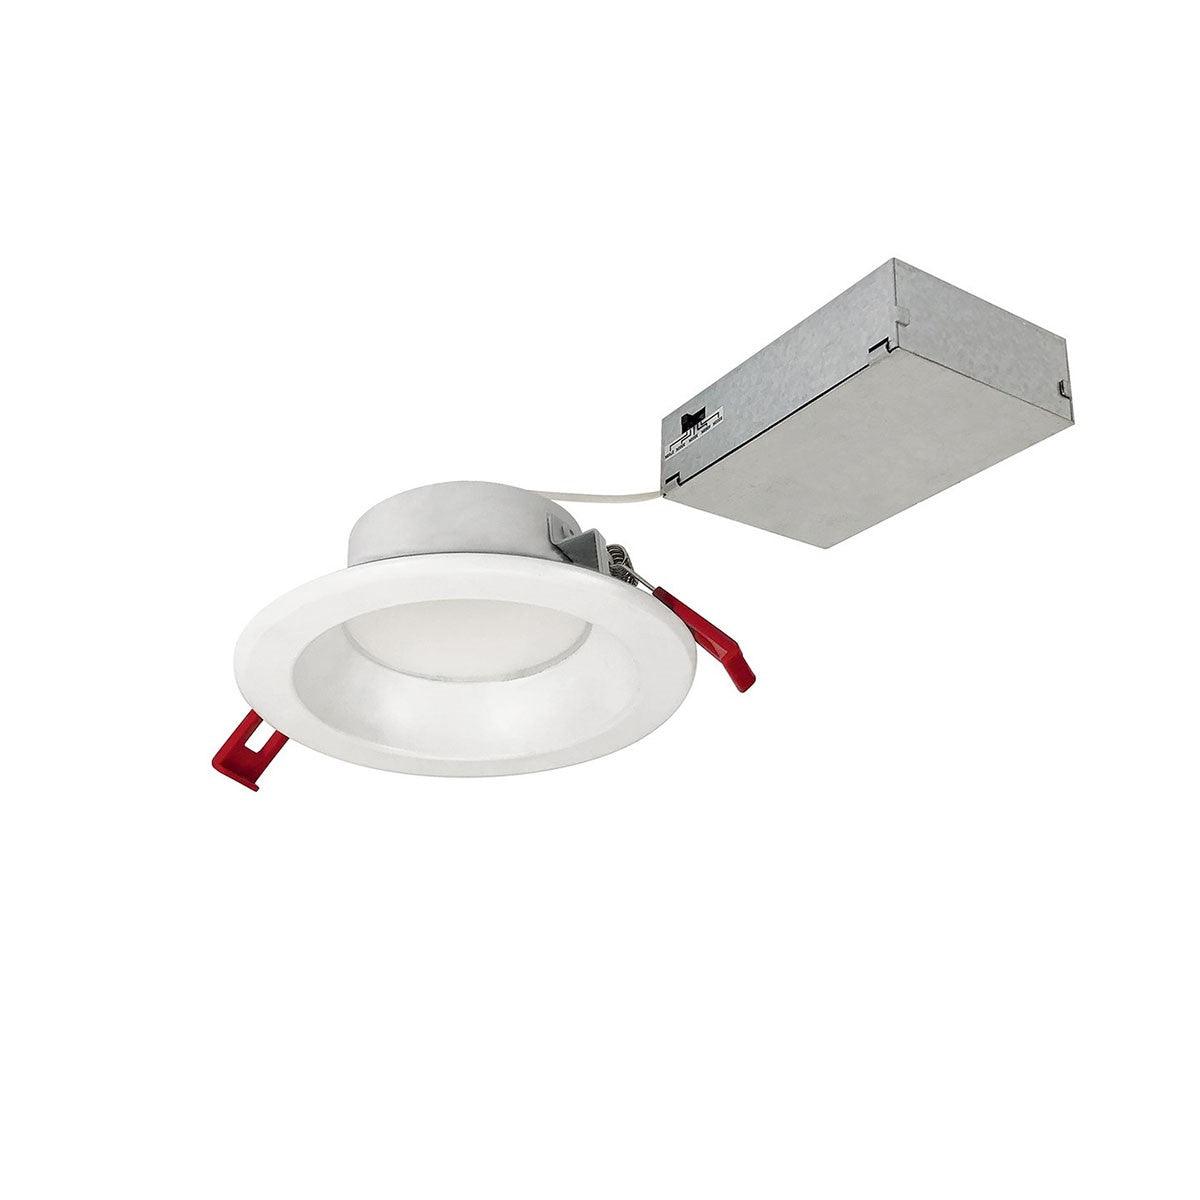 Theia 4 Inch Canless LED Recessed Light, 10 Watt, 950 Lumens, Selectable CCT, 2700K to 5000K, Matte Powder White Finish - Bees Lighting